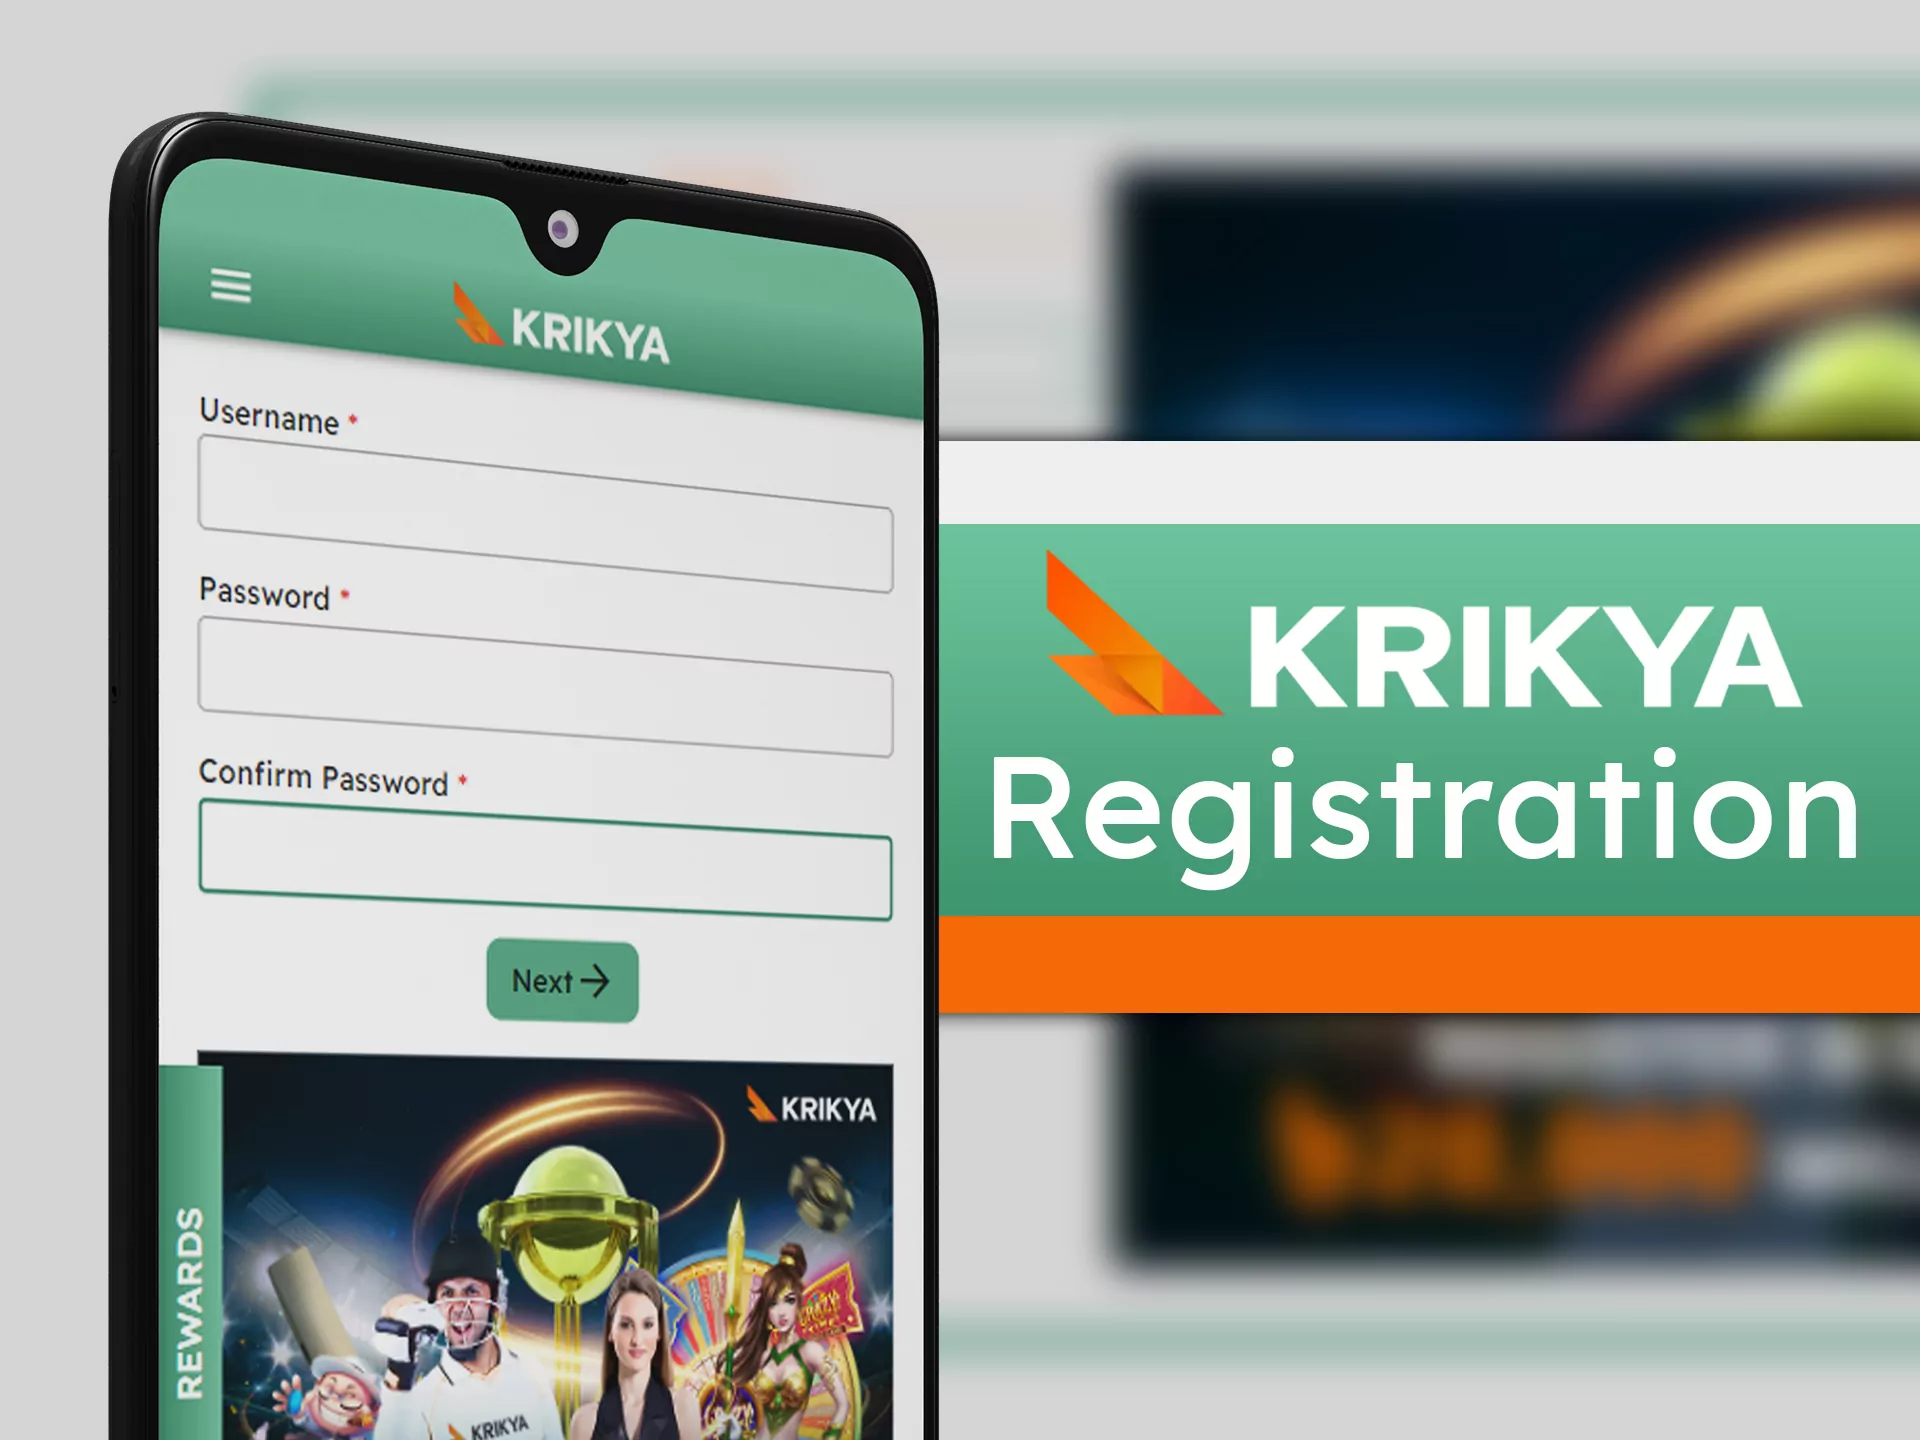 The registration process is completed instantly using the Krikya app.